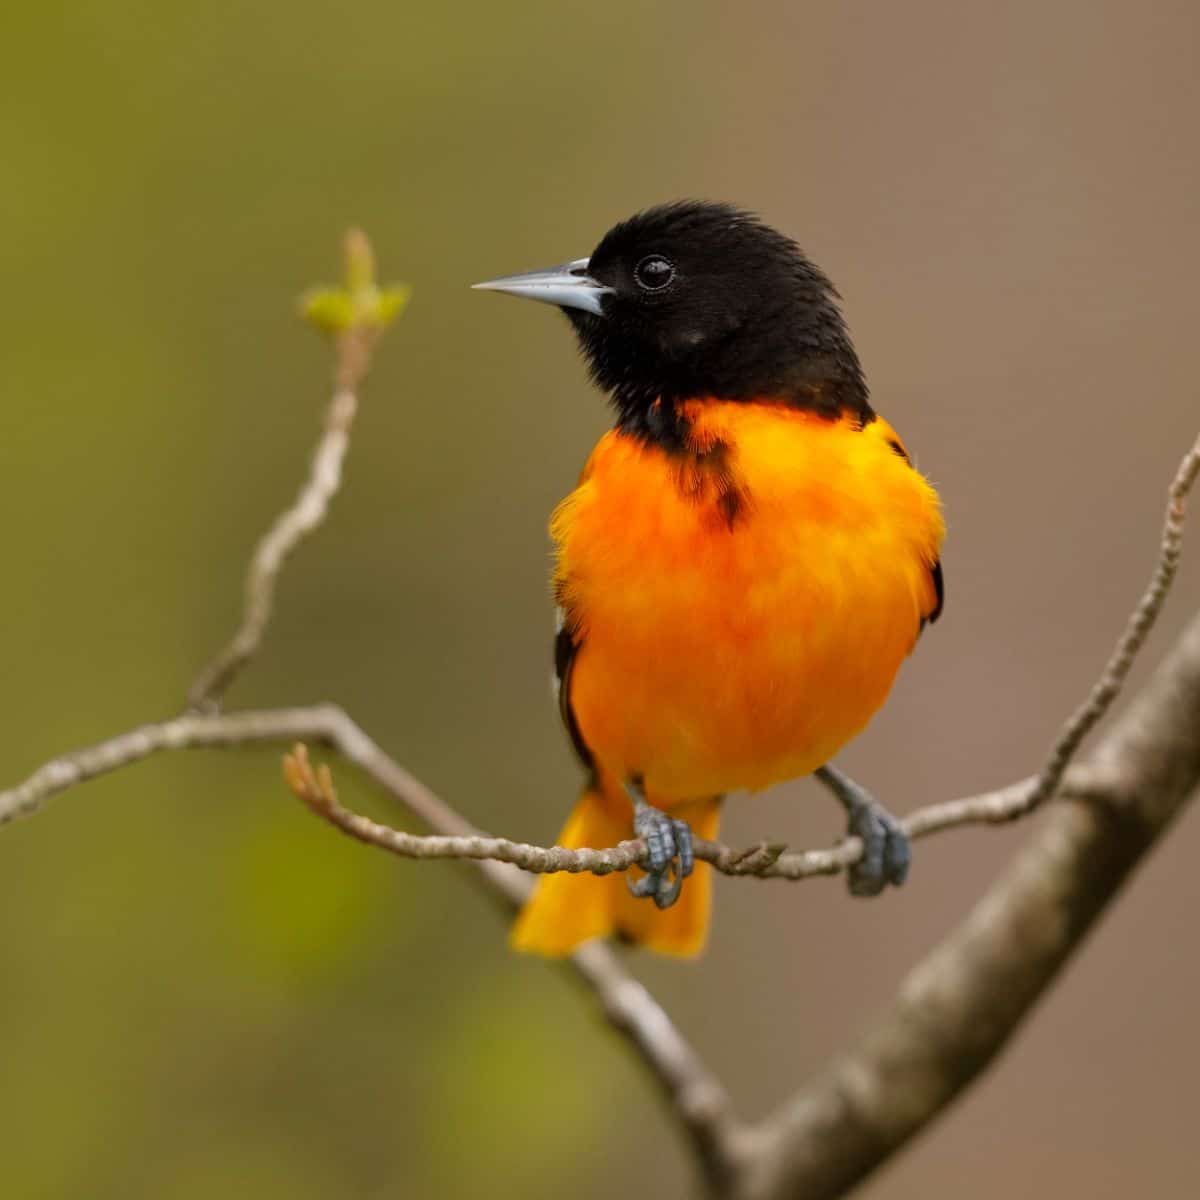 A beautiful Baltimore Oriole perched on a thin branch.